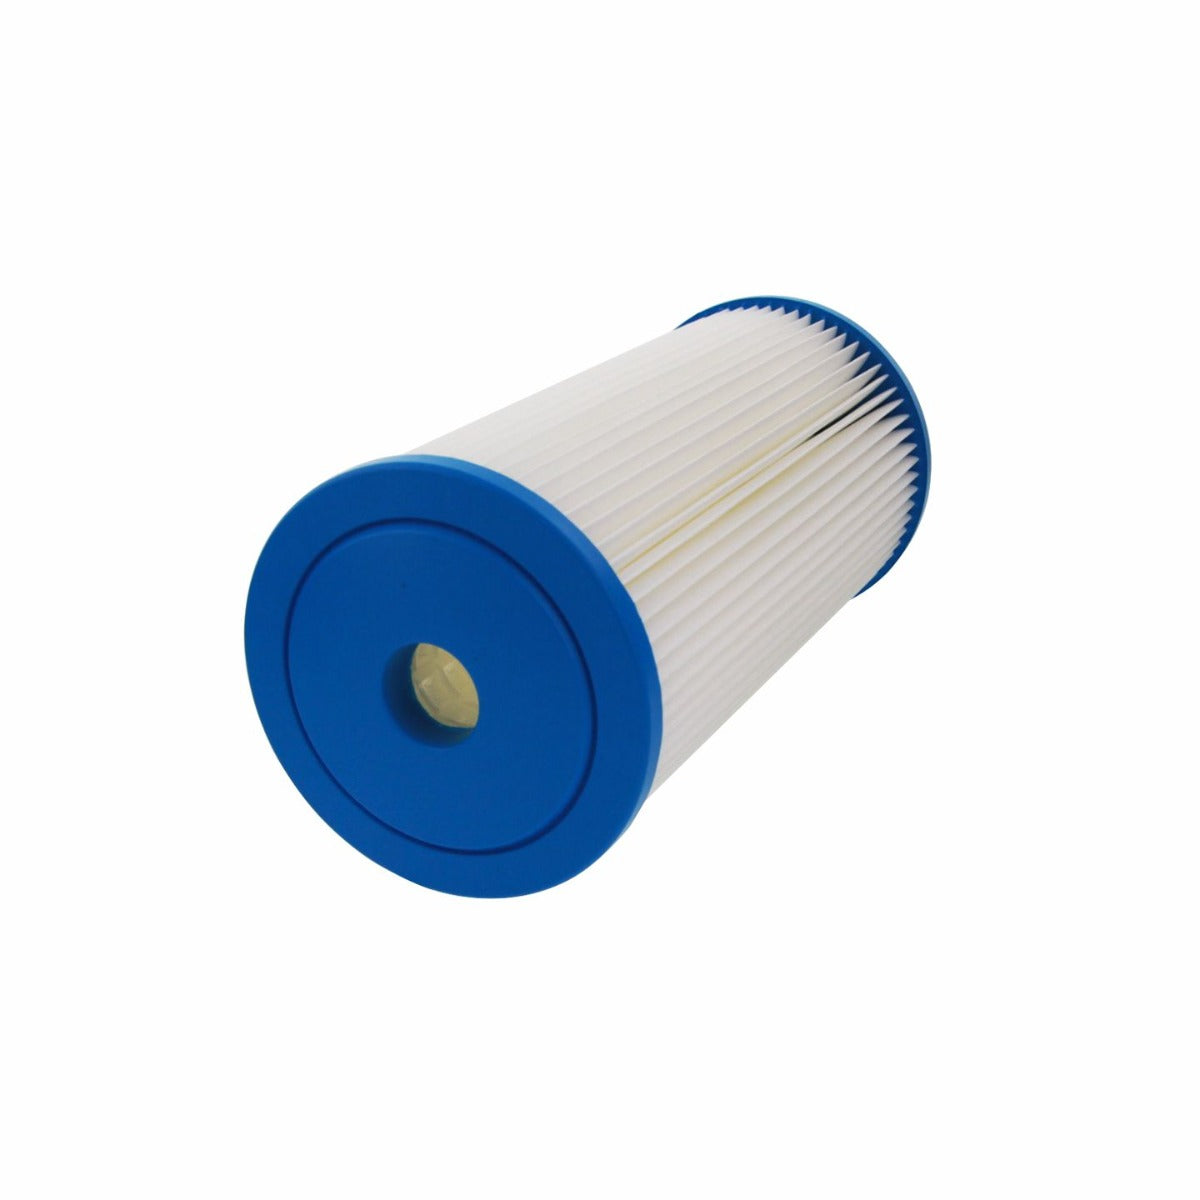 50 Micron Pleated Polyester Sediment Filter by USWF 10"x4.5"